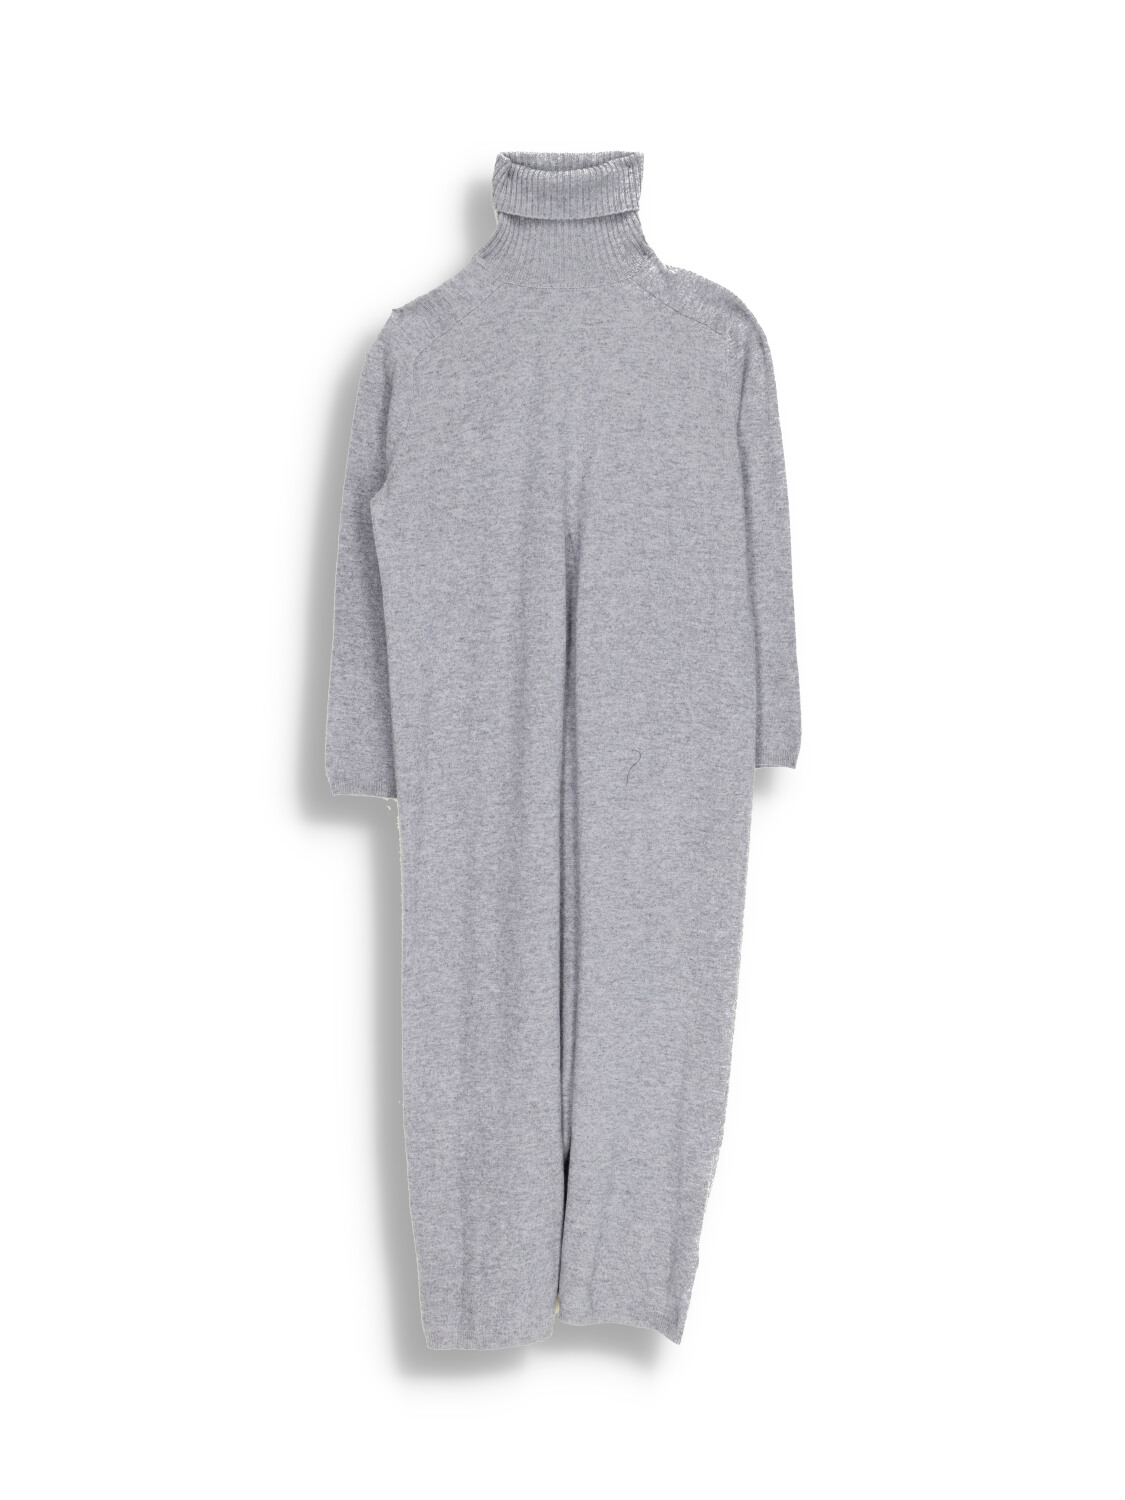 Long turtleneck sweater with slit design in wool and cashmere